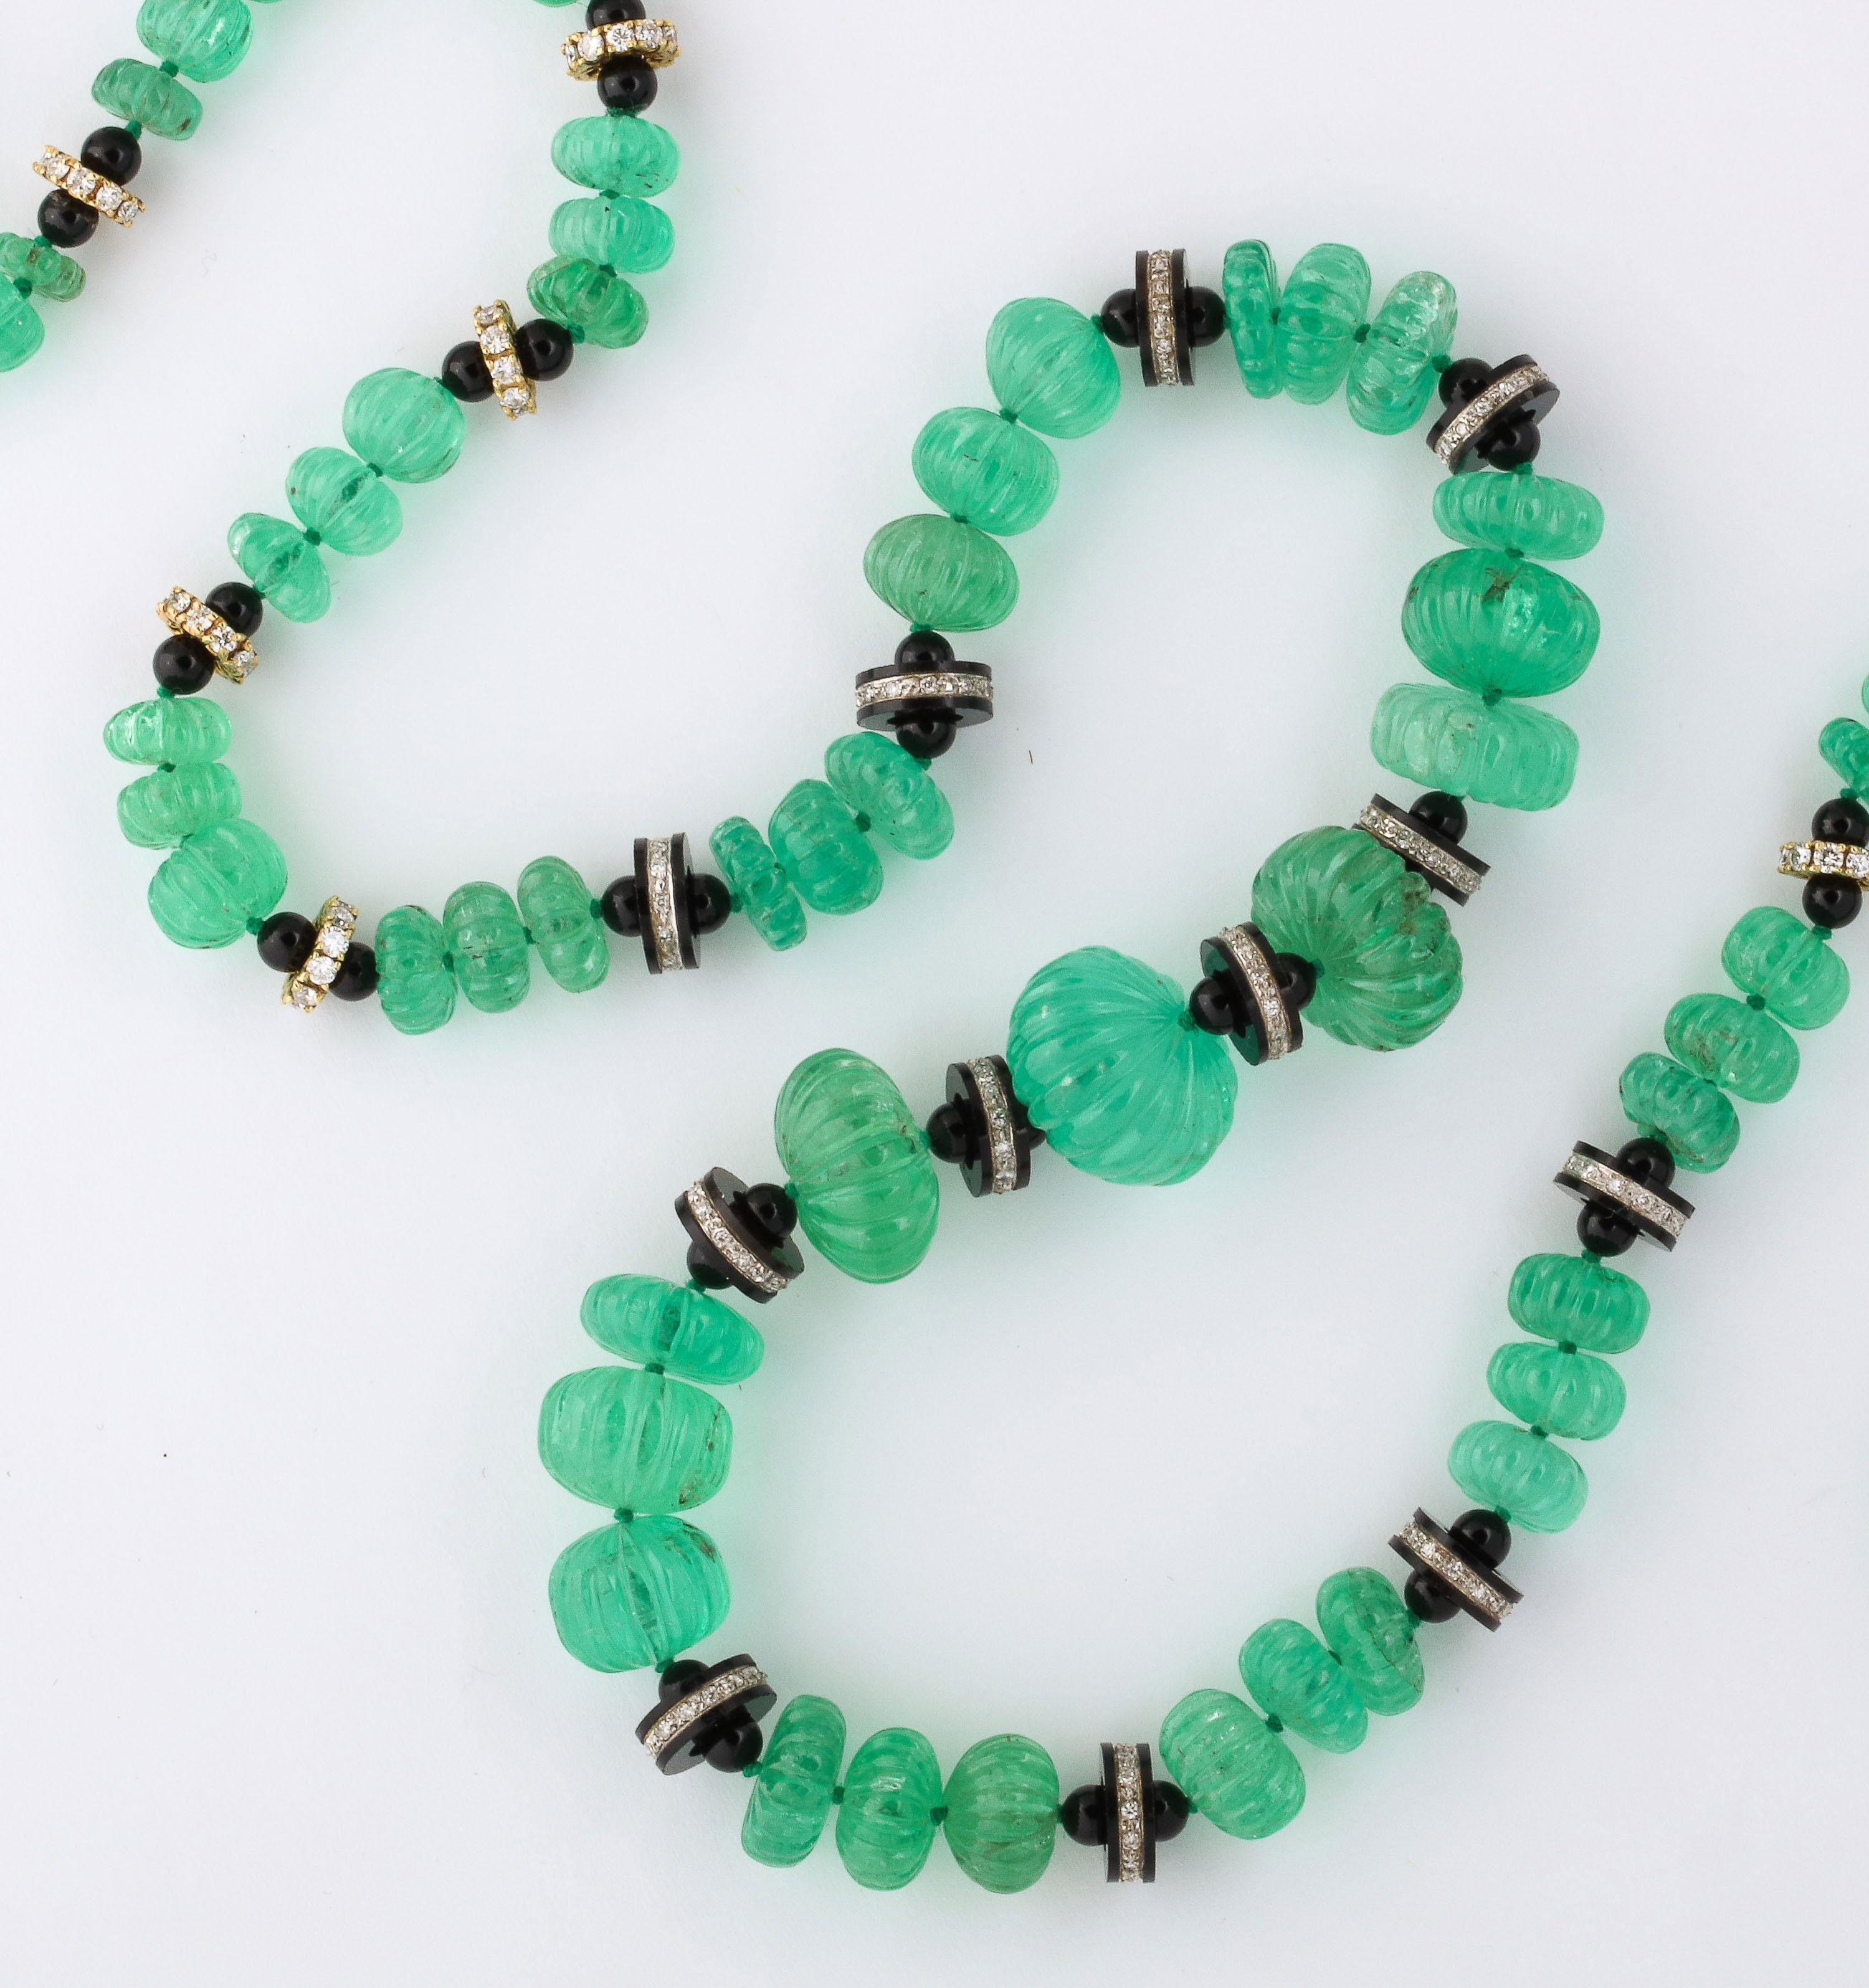 Necklace of Graduated Melon Shaped Emerald Beads with Onyx and Diamond Spacers 1